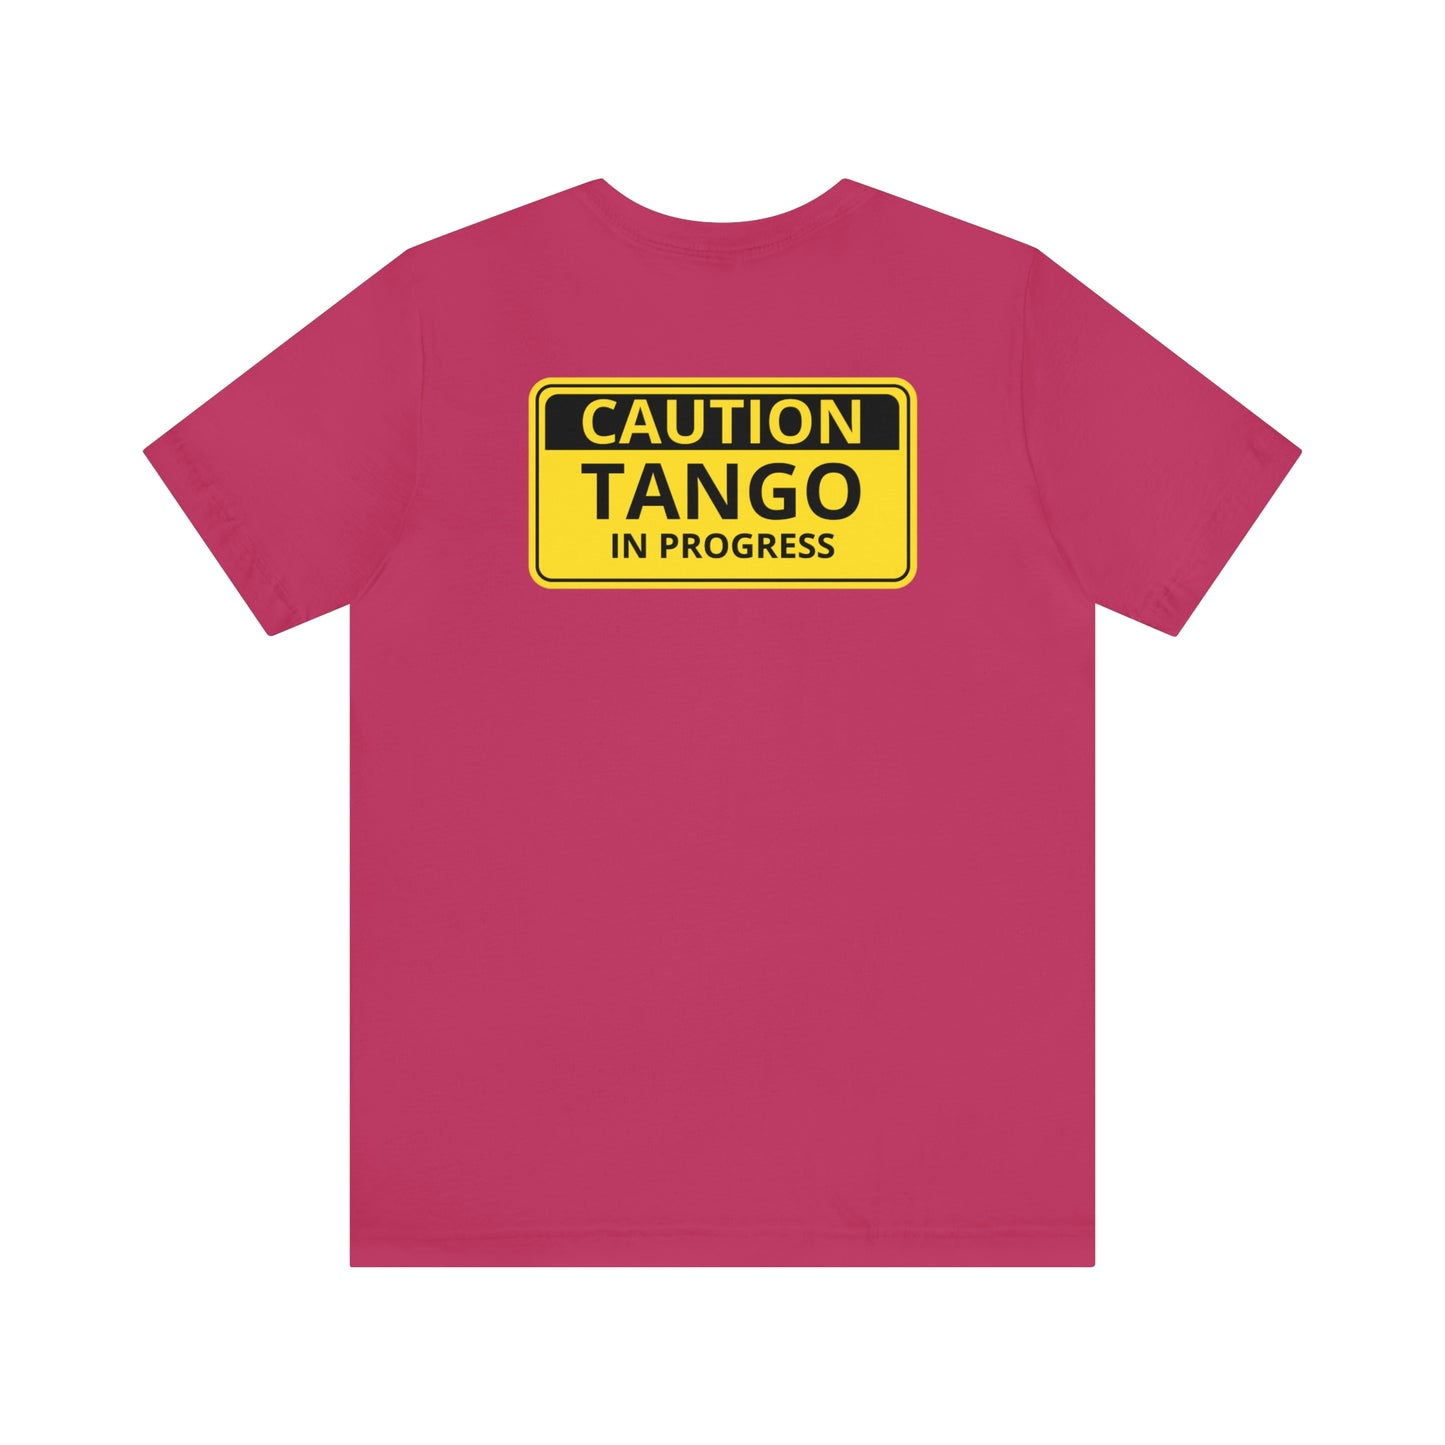 An argentine tango dance tshirt with the text "Caution Tango in progress" written on a yellow warning sign. A funny tshirt for tango dancers!